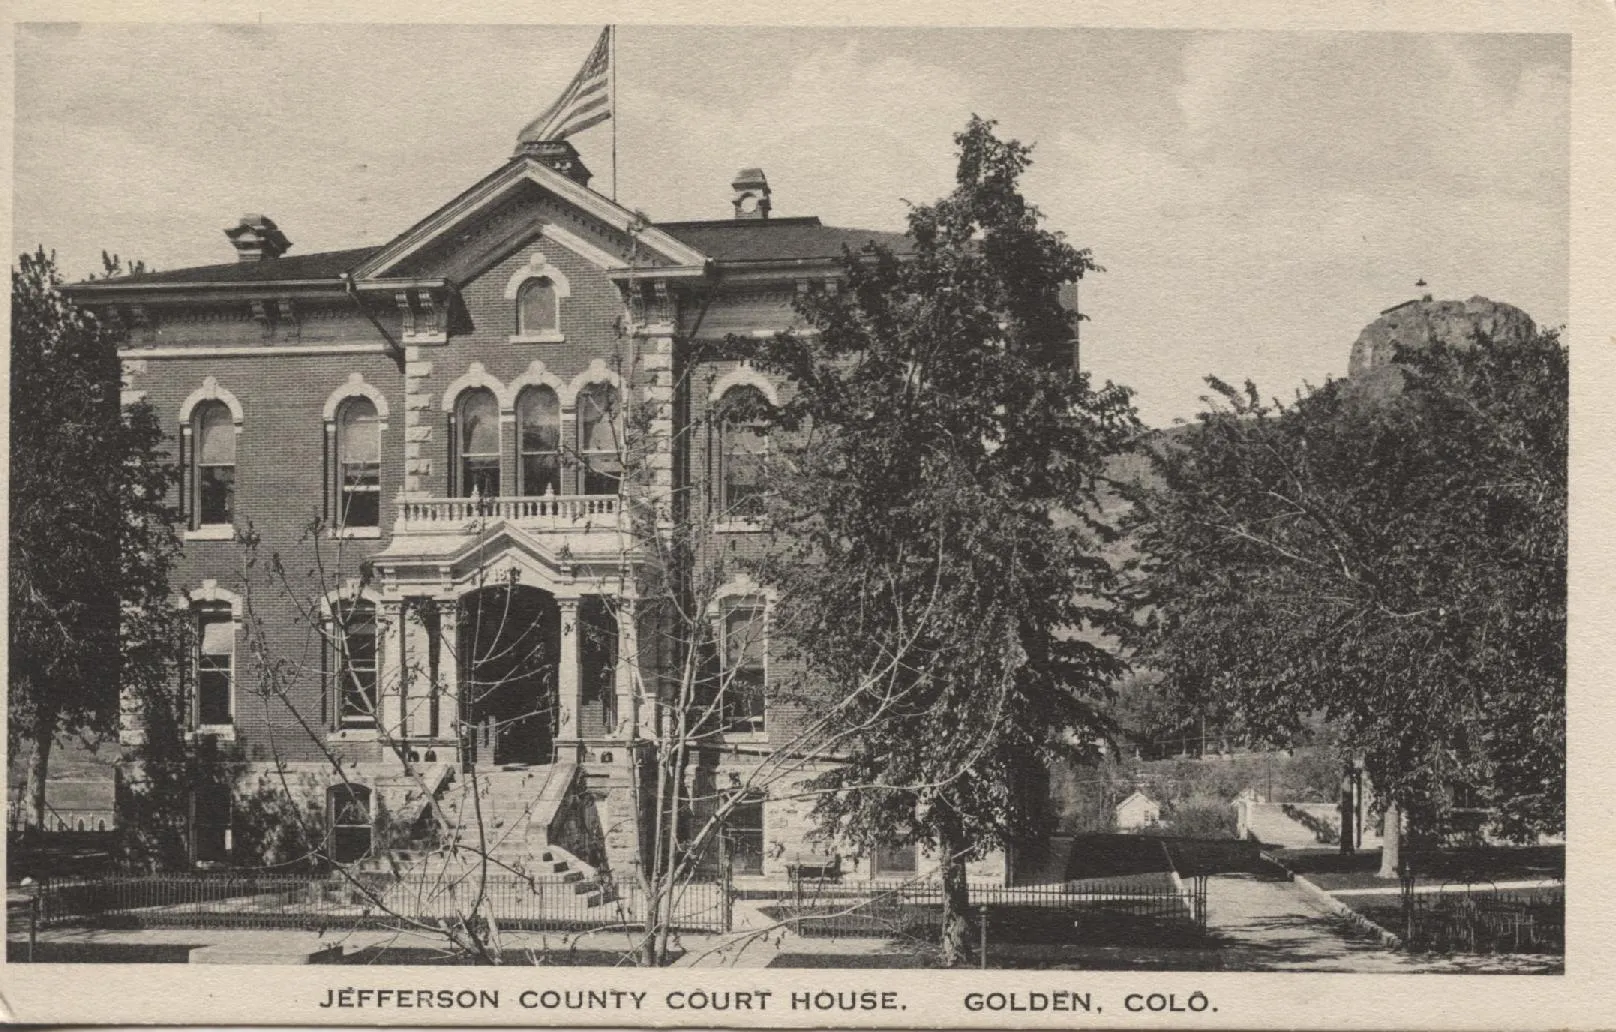 Antique postcard showing the 1878 Jefferson County Court house with Castle Rock in the background.